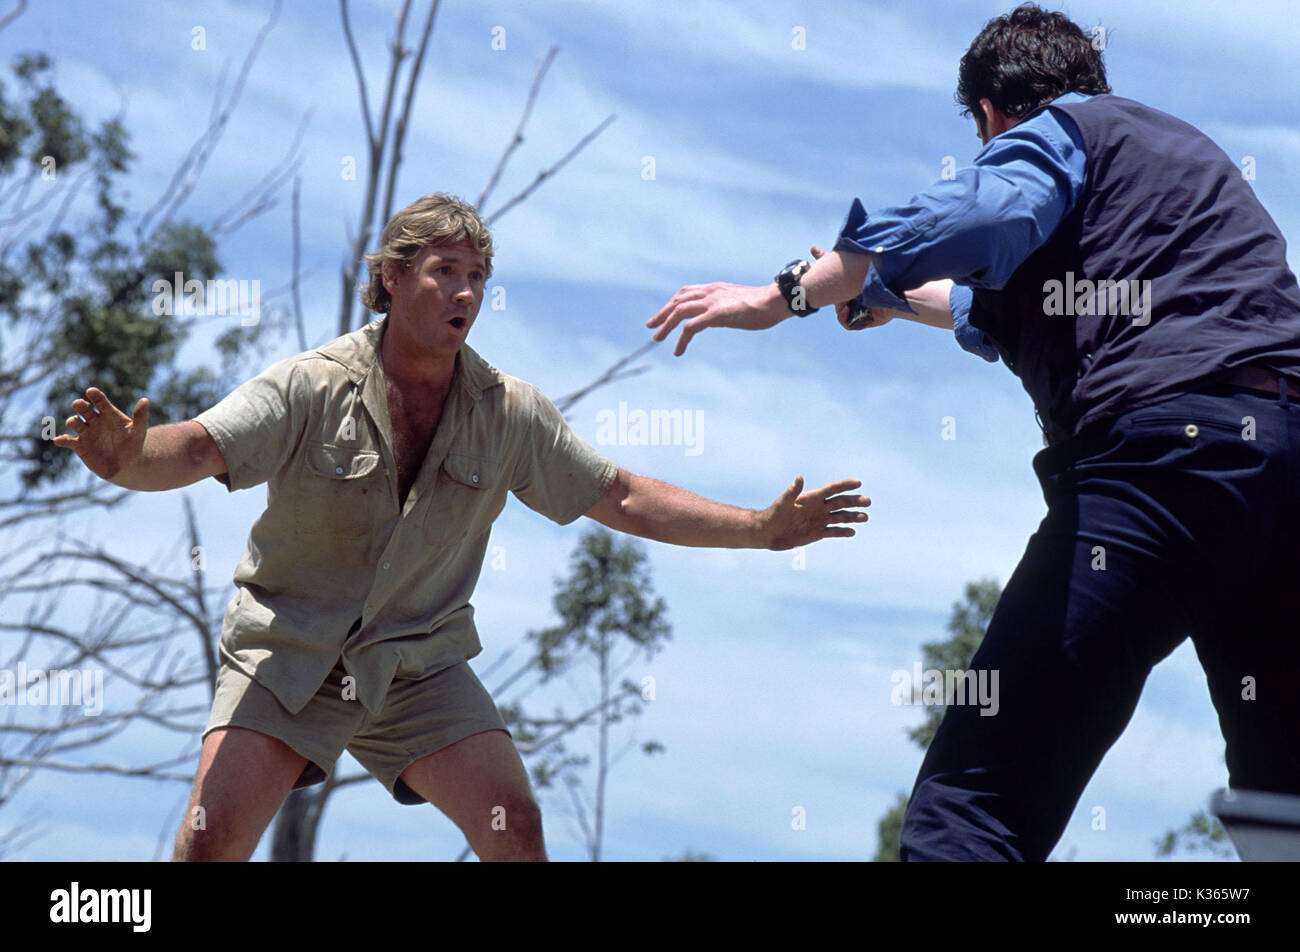 THE CROCODILE HUNTER: COLLISION COURSE STEVE IRWIN faces off with a poacher on top of a speeding vehicle in Metro-Goldwyn-Mayer Pictures adventure comedy Photo by: Frazer Bailey Stock Photo